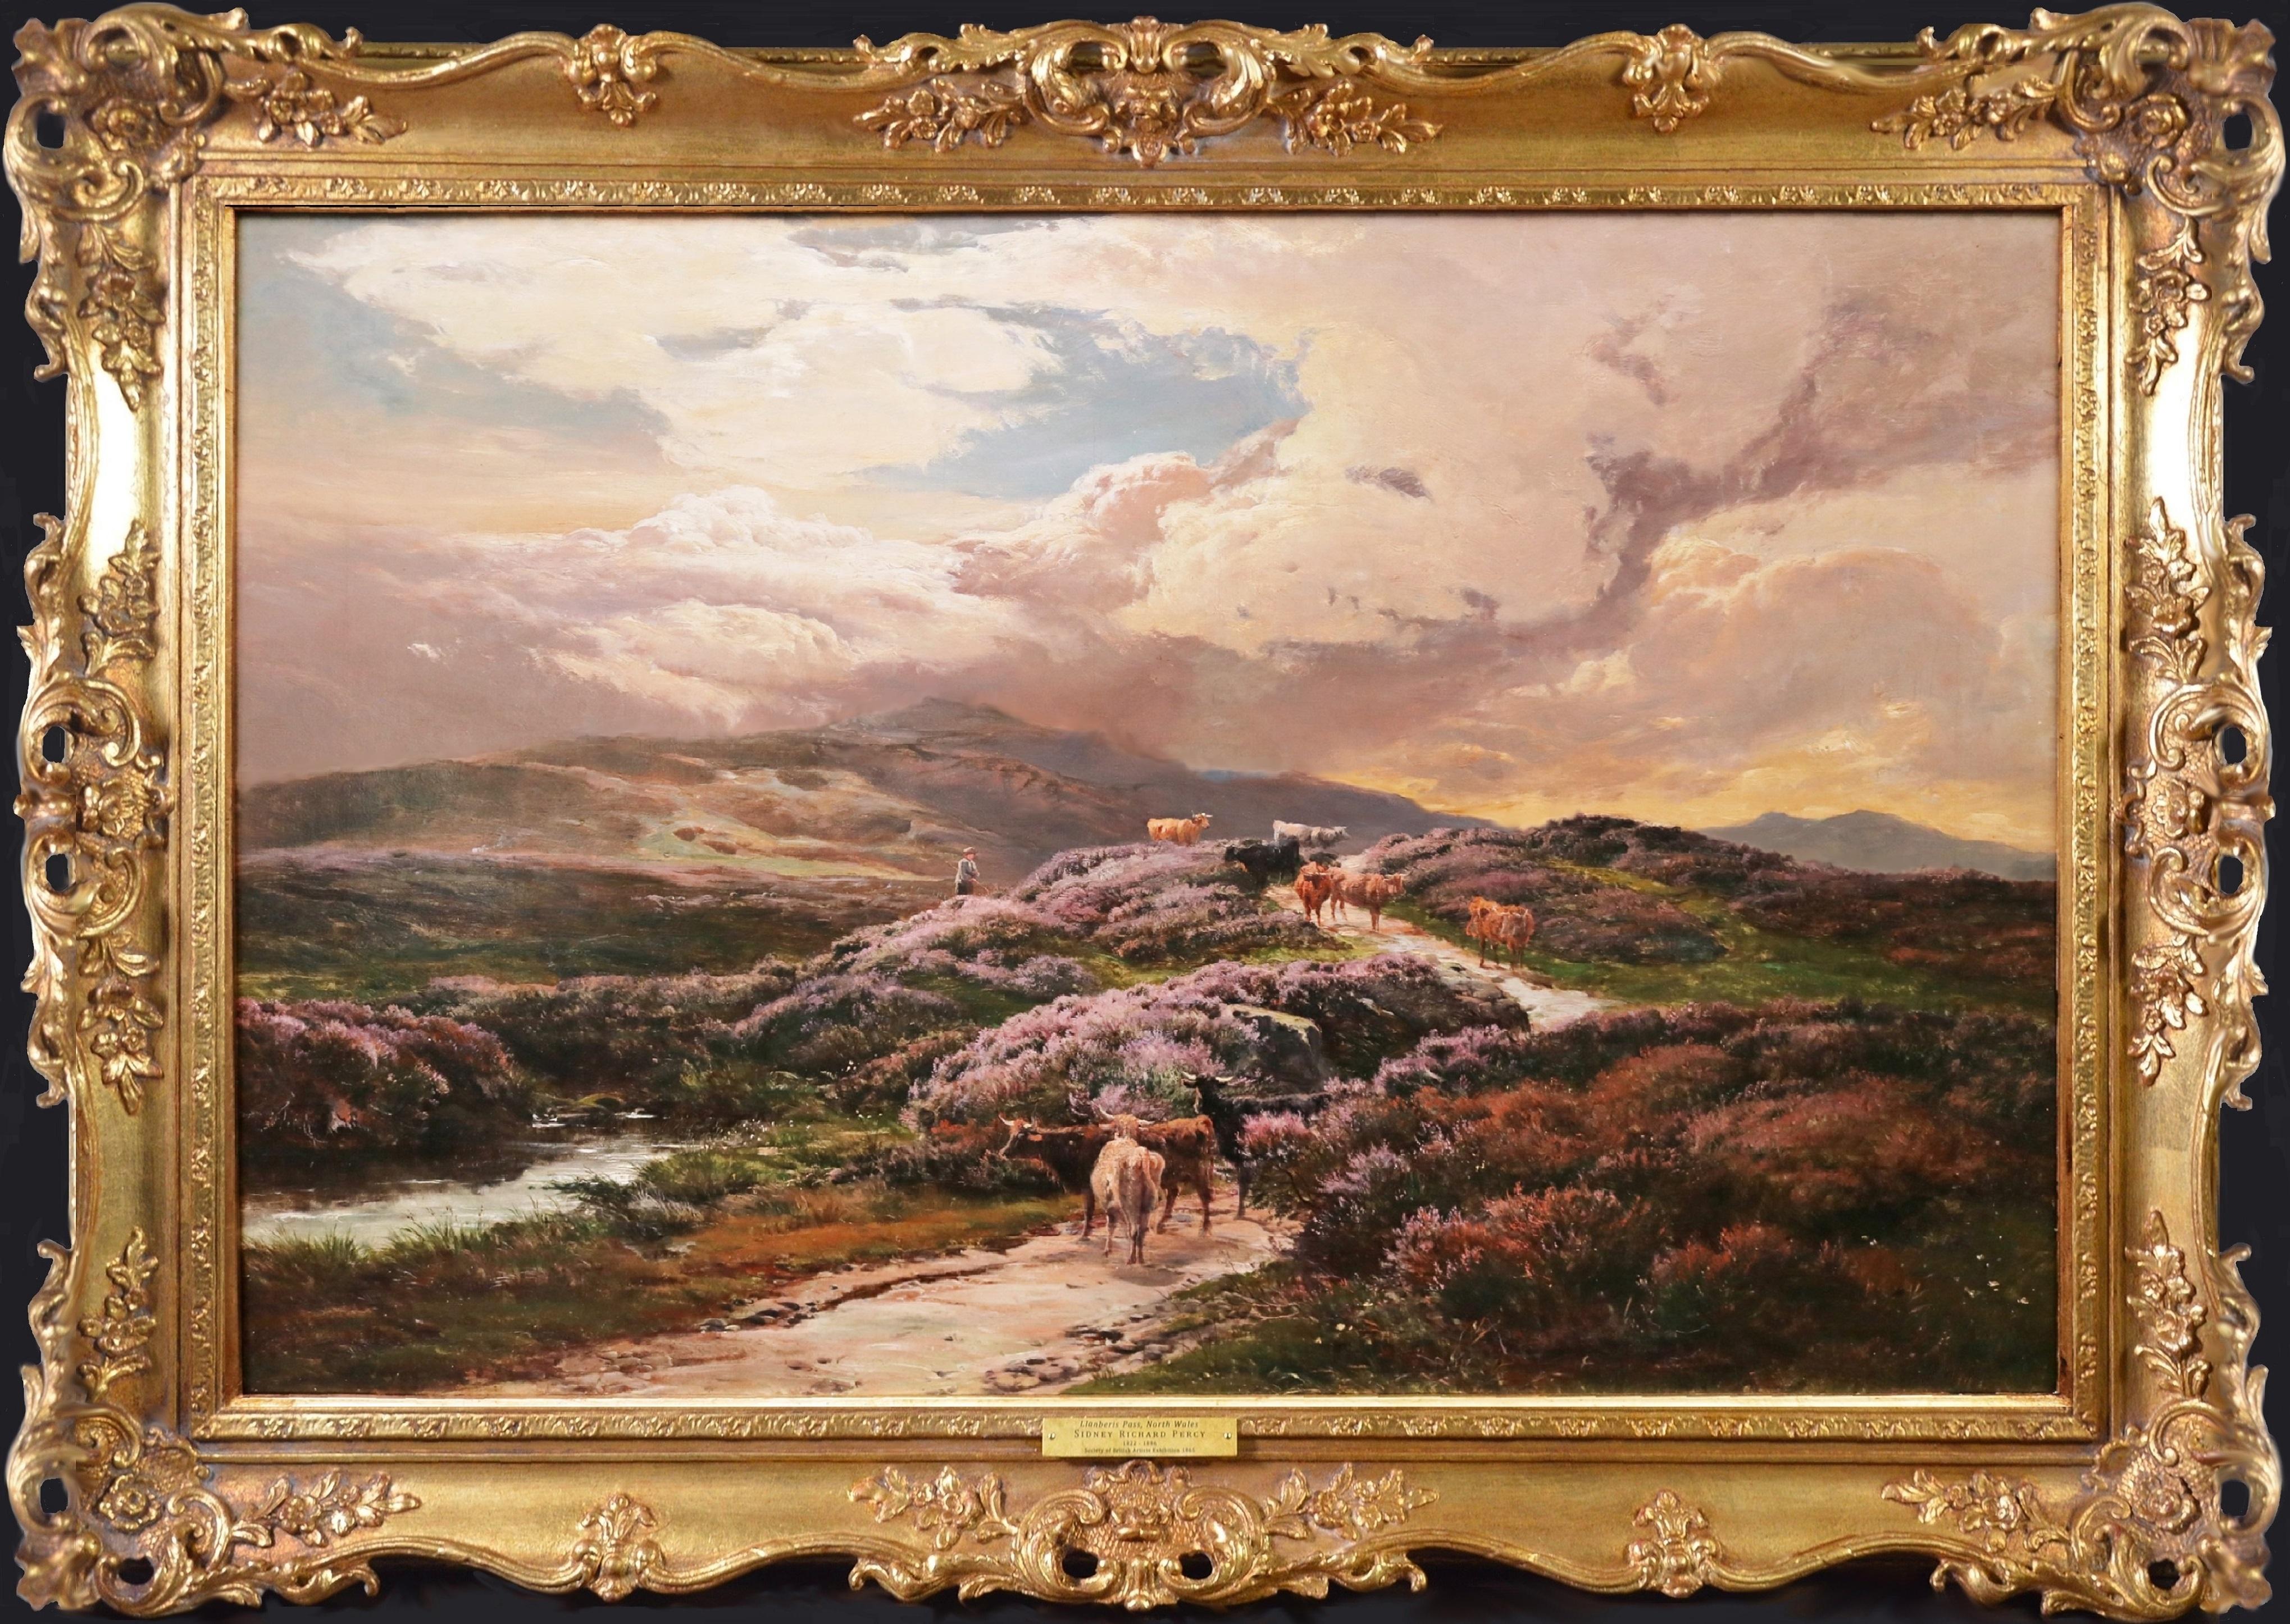 ‘Near Moel Siabod, North Wales’ by Sidney Richard Percy (1822-1886). The painting – which depicts a figure herding cattle before an extensive landscape in Snowdonia – is signed by the artist and presented in a fine quality, bespoke gold metal leaf